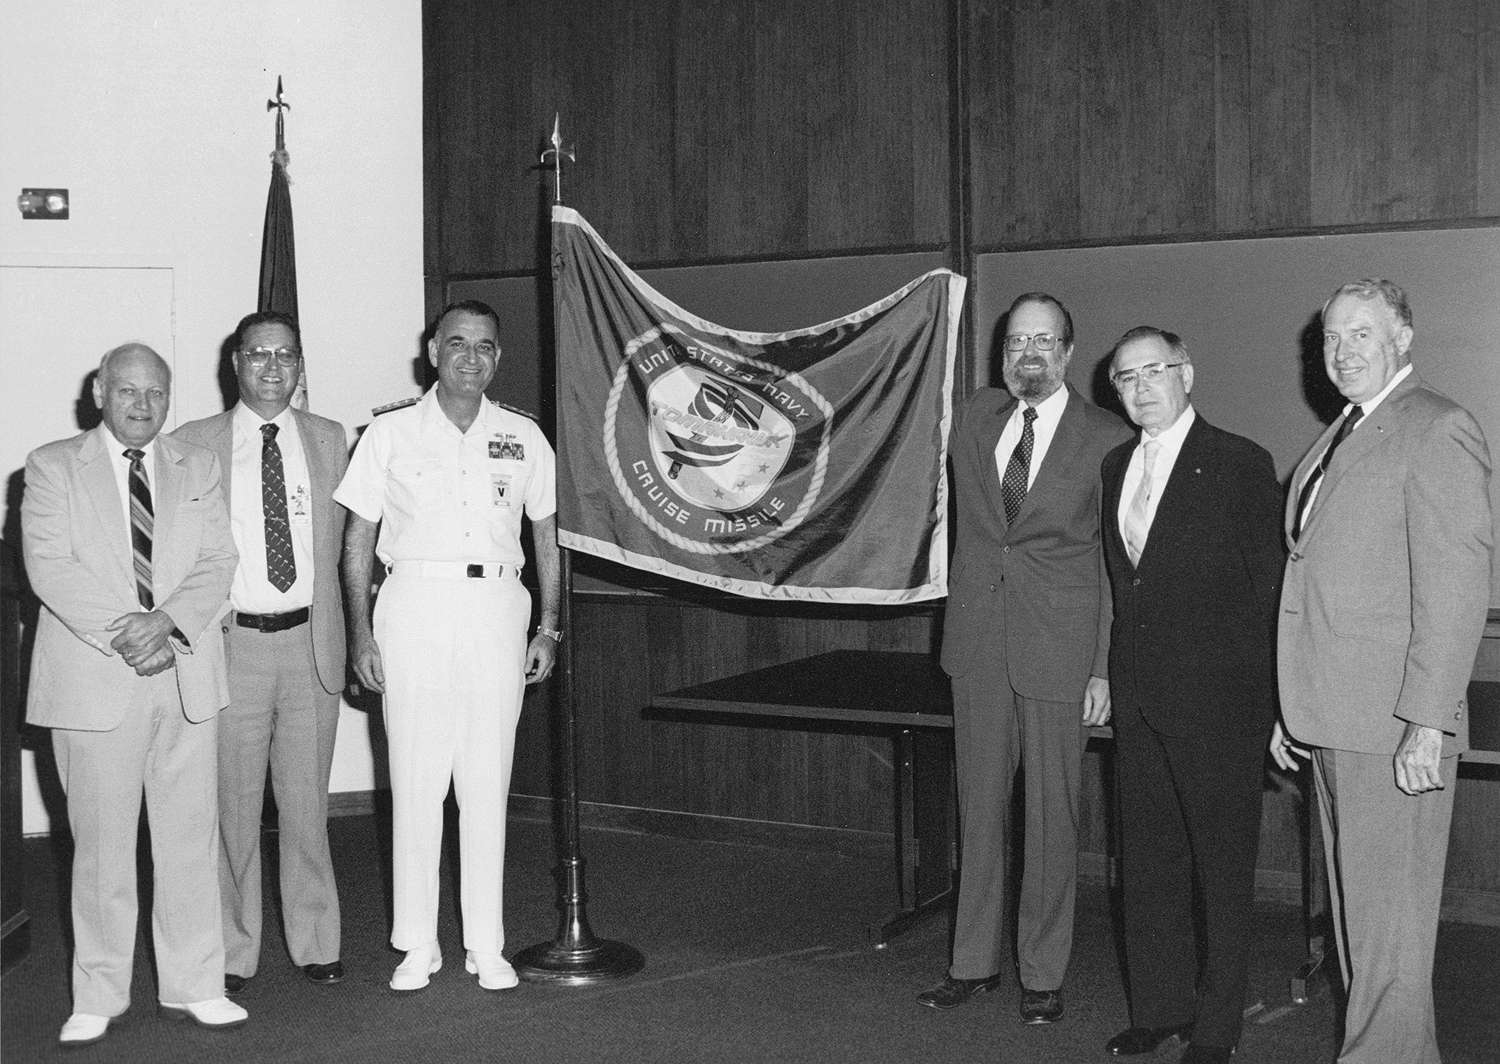 From left: Alvin Schulz, APL associate director; Marion Oliver, Tomahawk program manager; Rear Adm. S. J. Hostettler; Carl Bostrom, Lab director; Al Eaton, assistant director and supervisor of the Fleet Systems Department; and Tom Sheppard, associate supervisor of Fleet Systems.